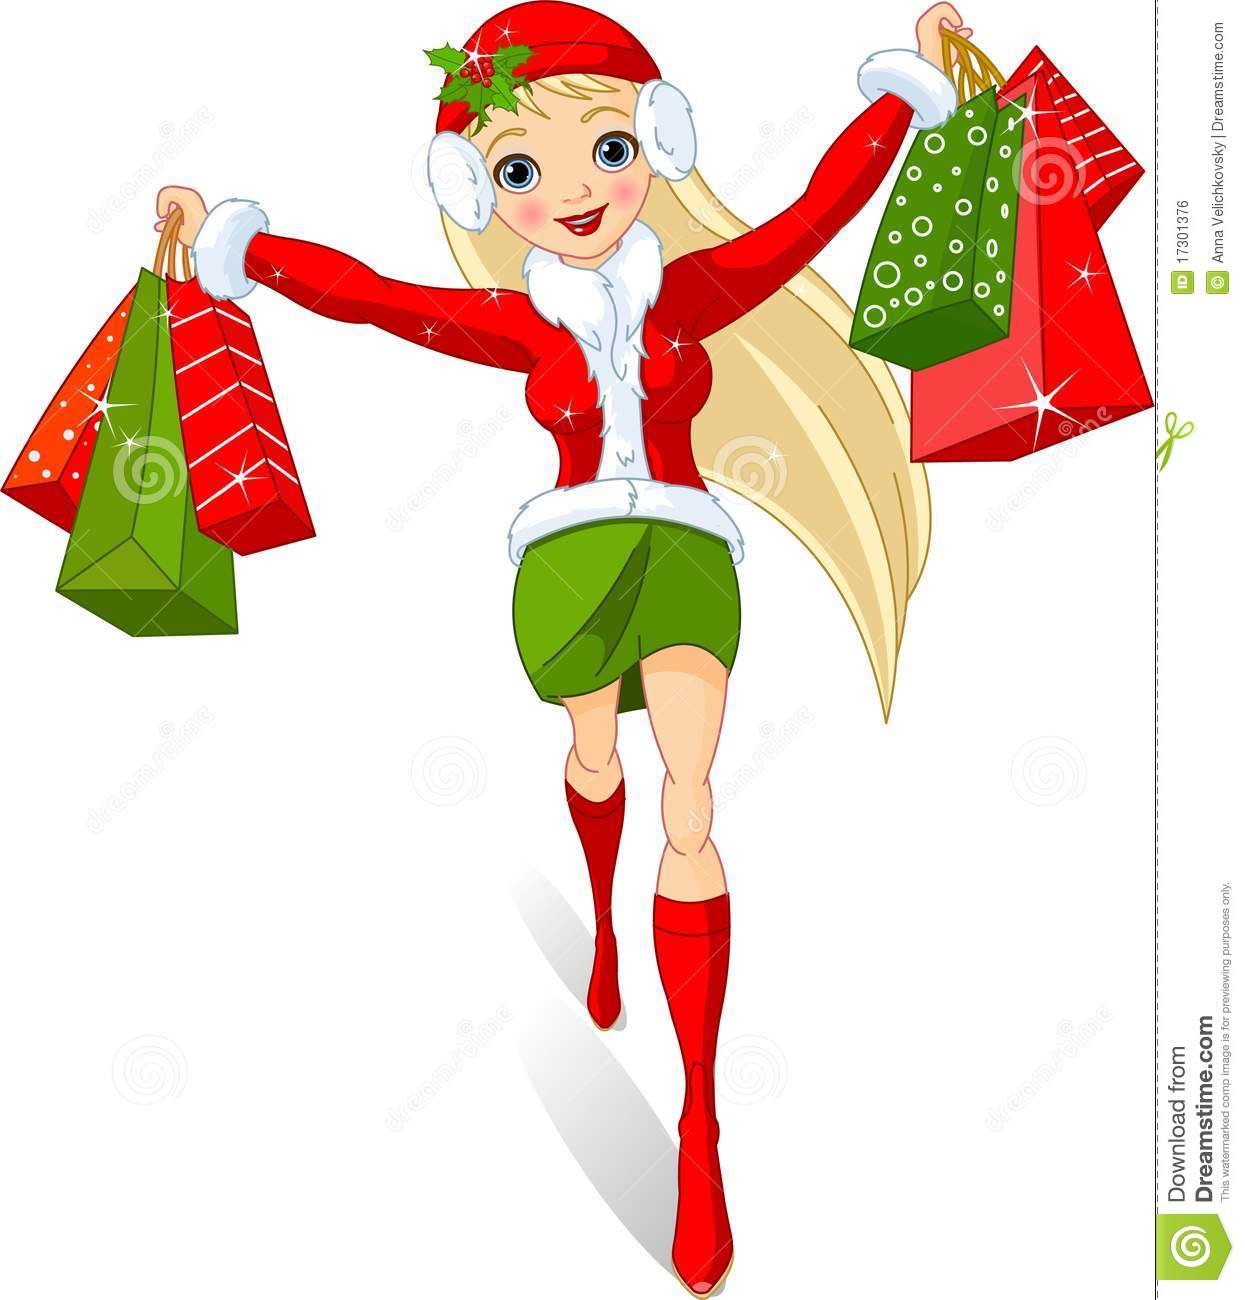 Christmas Shopping  Illustration Of A Girl With Shopping Bags